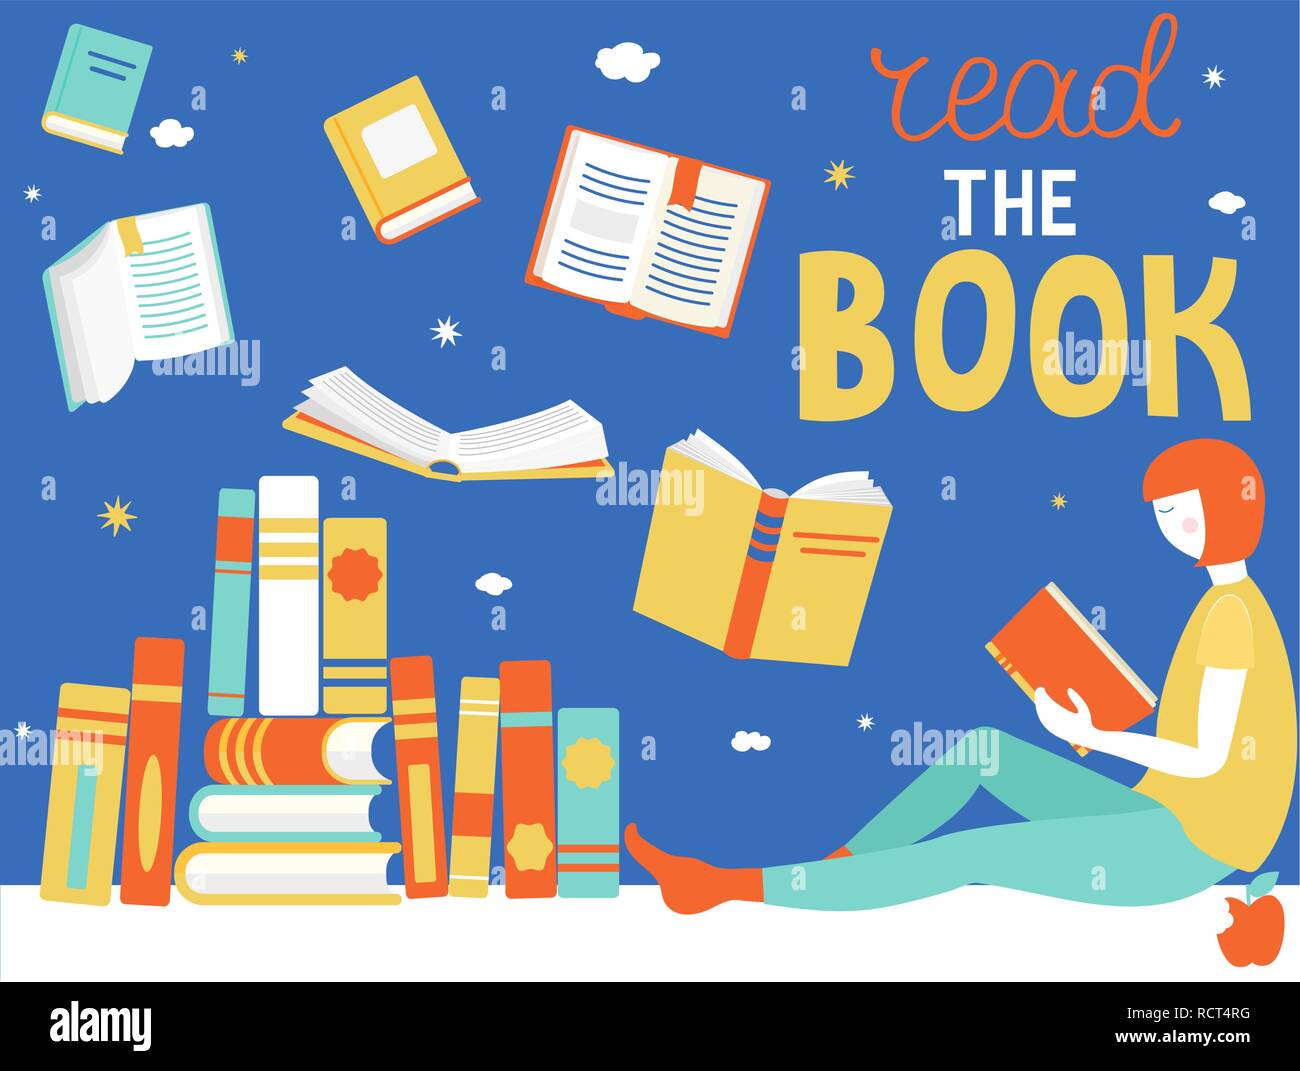 Young girl is Reading book. Close and open books in different positions. Learning and education, relaxation and enjoyment concept design. Vector illustration in flat style. Stock Vector